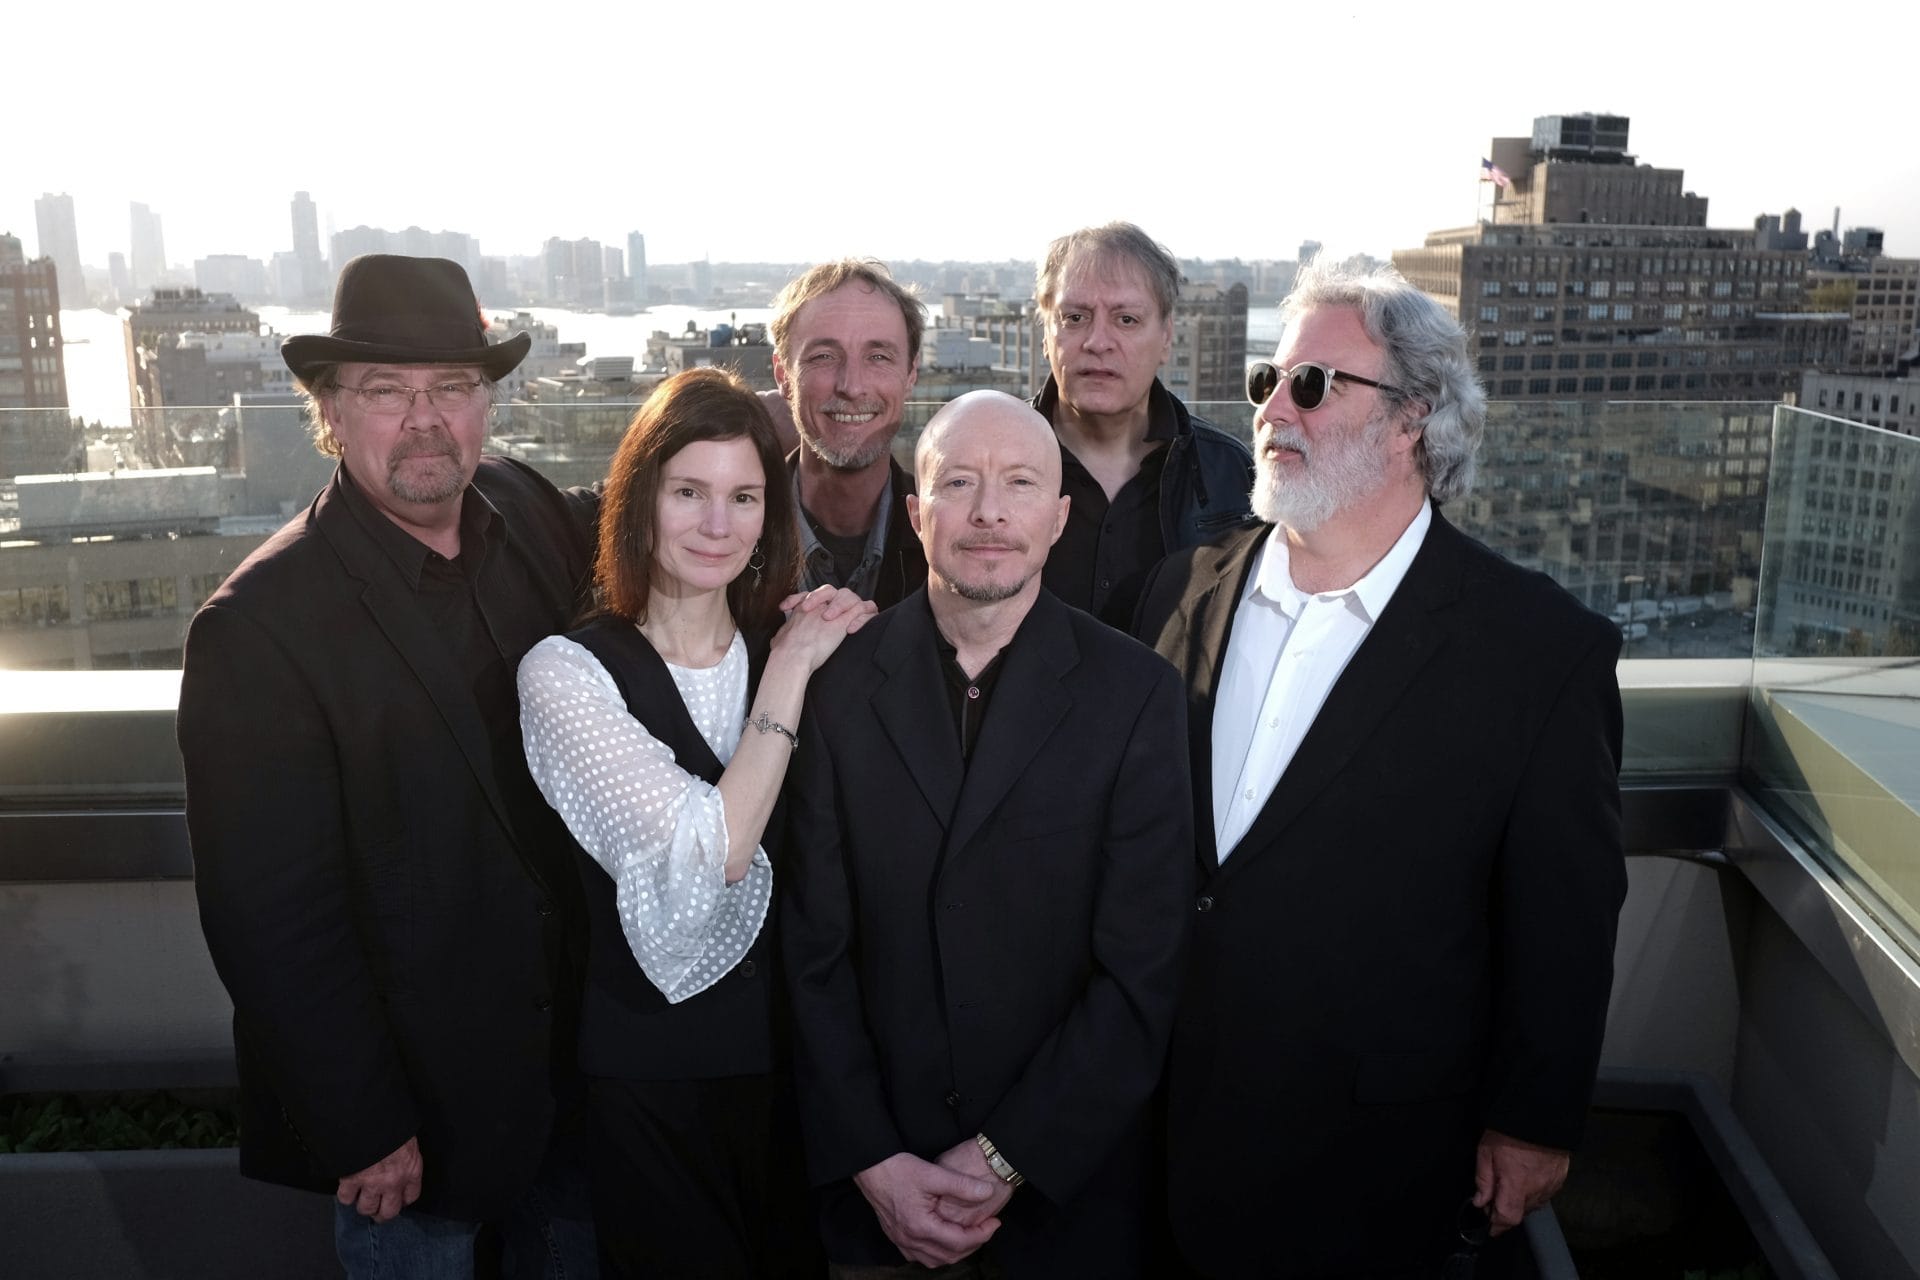 10000 Maniacs Hd Pictures 10000 Maniacs Full Hd Wallpapers - Skyline , HD Wallpaper & Backgrounds